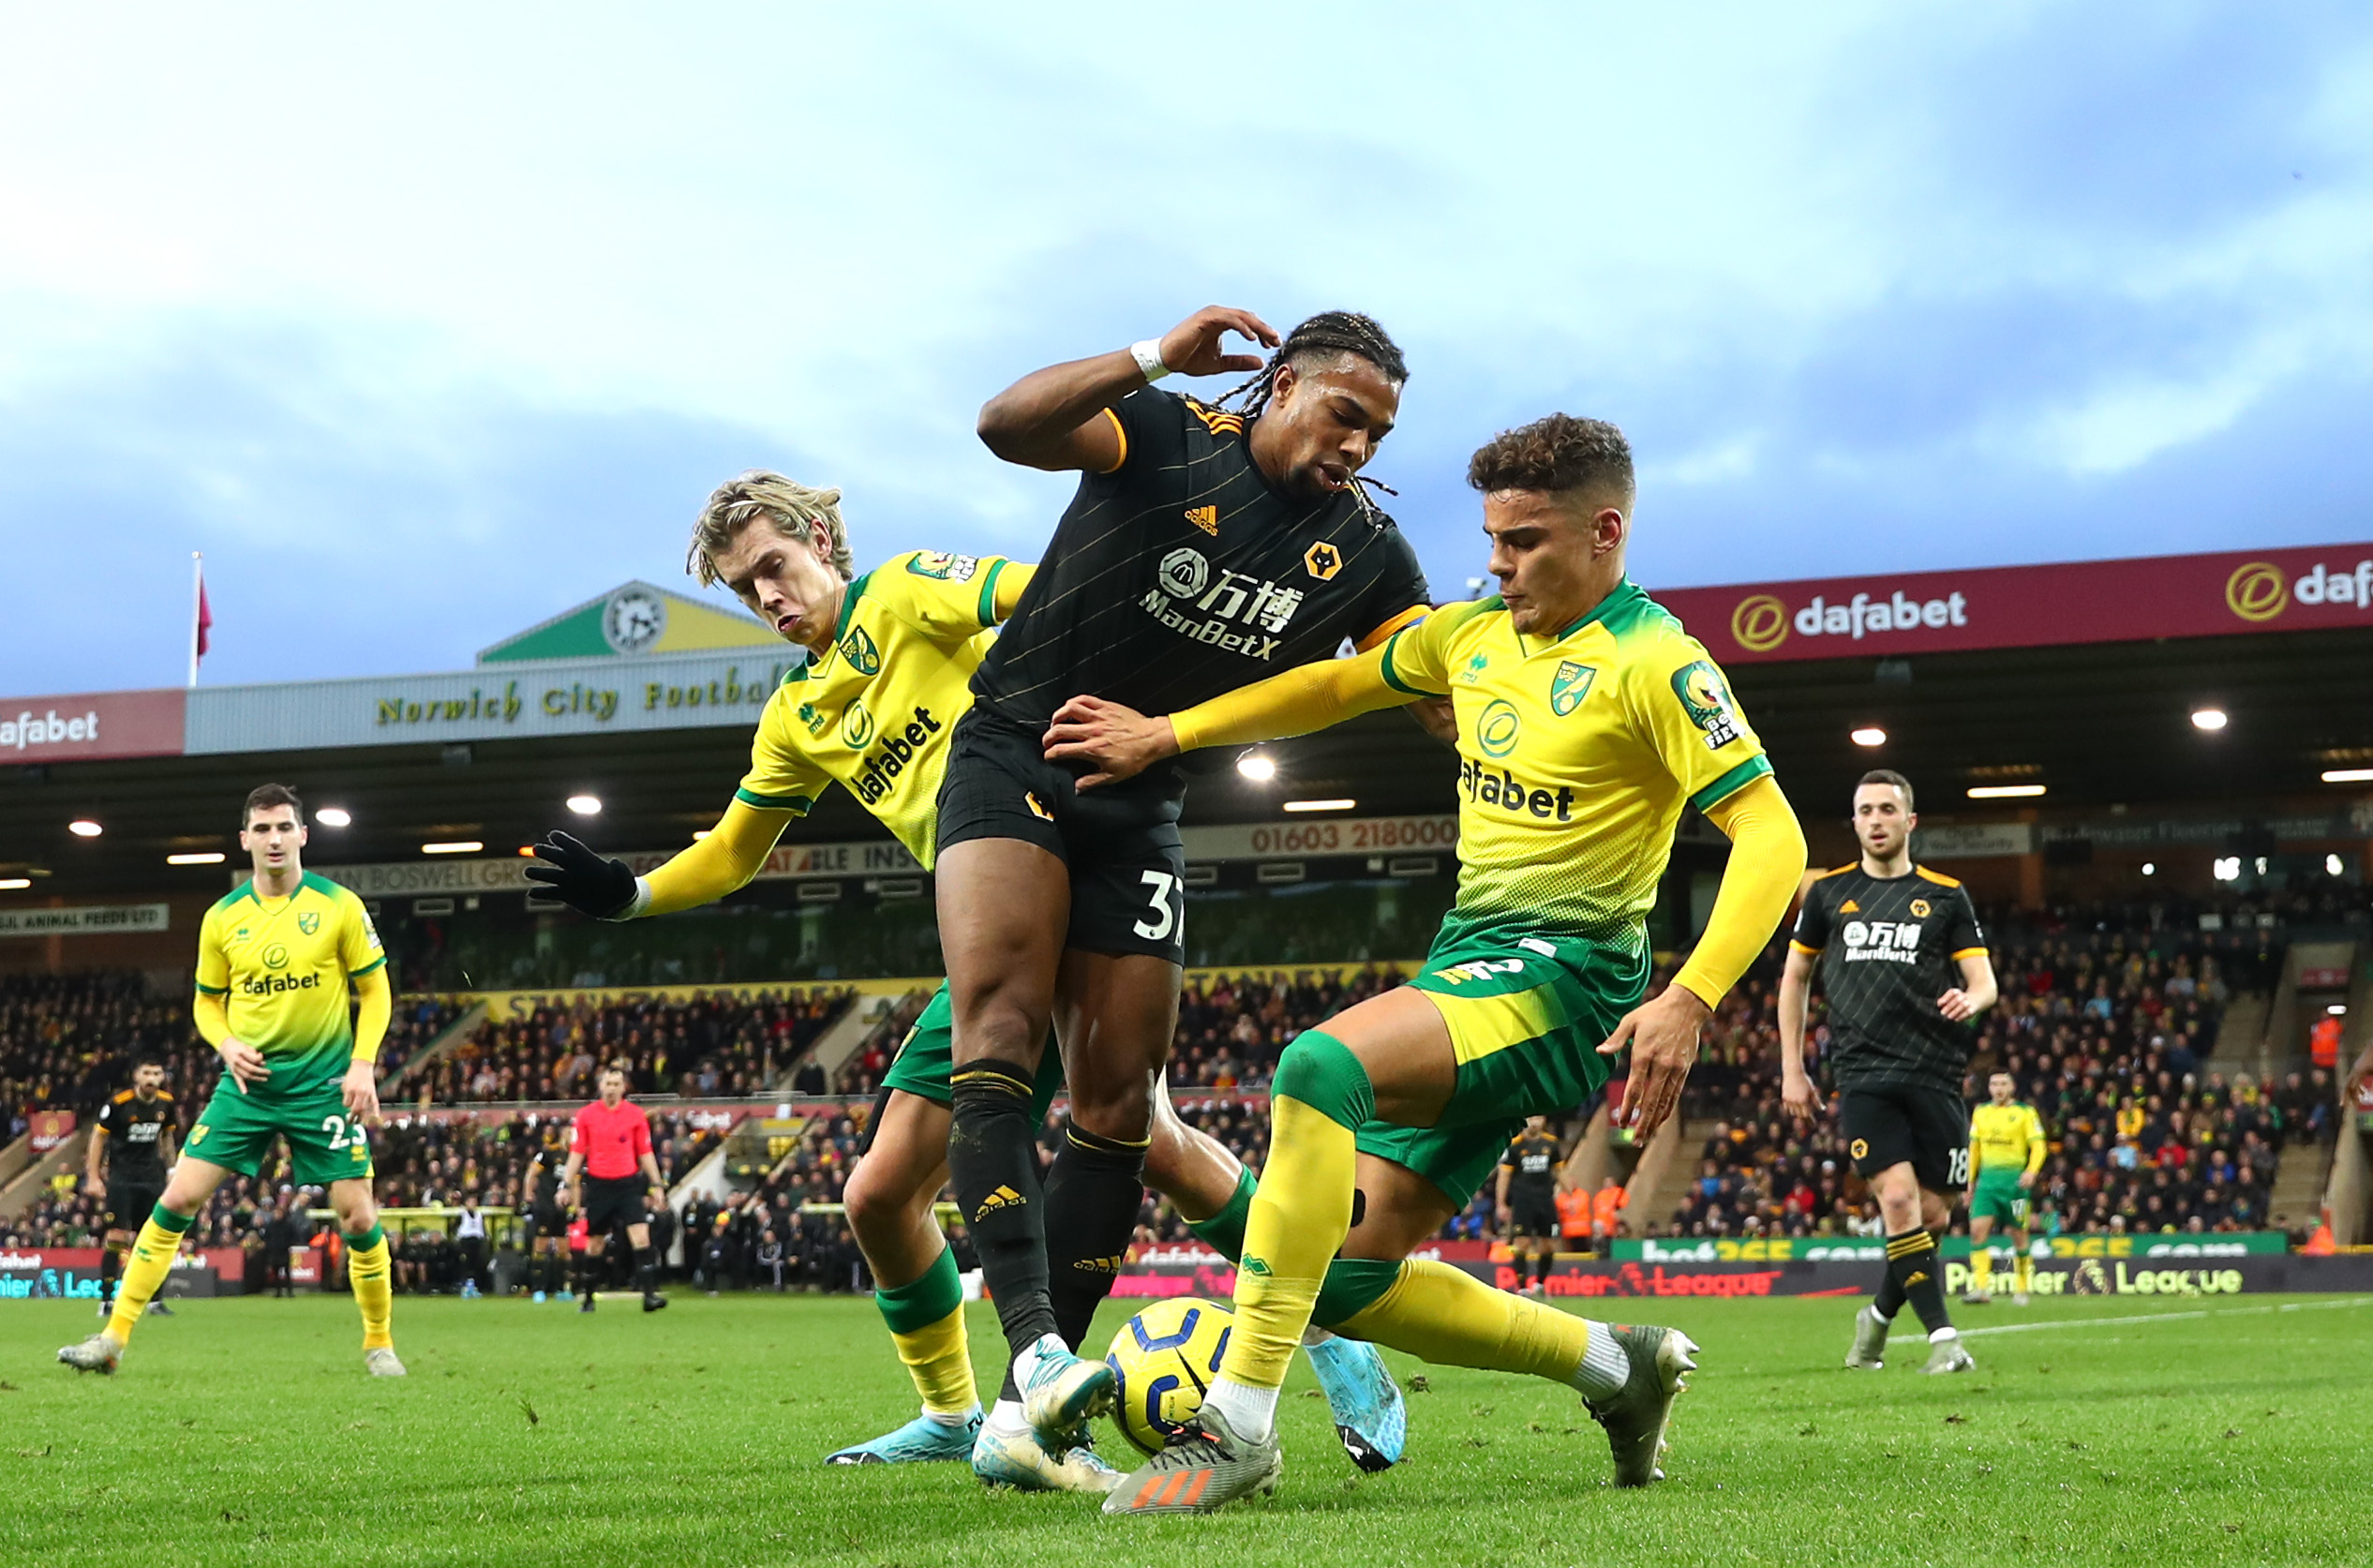 NORWICH, ENGLAND - DECEMBER 21: Adama Traore of Wolverhampton Wanderers is tackled by Todd Cantwell and Max Aarons of Norwich City during the Premier League match between Norwich City and Wolverhampton Wanderers at Carrow Road on December 21, 2019 in Norwich, United Kingdom. (Photo by Julian Finney/Getty Images)